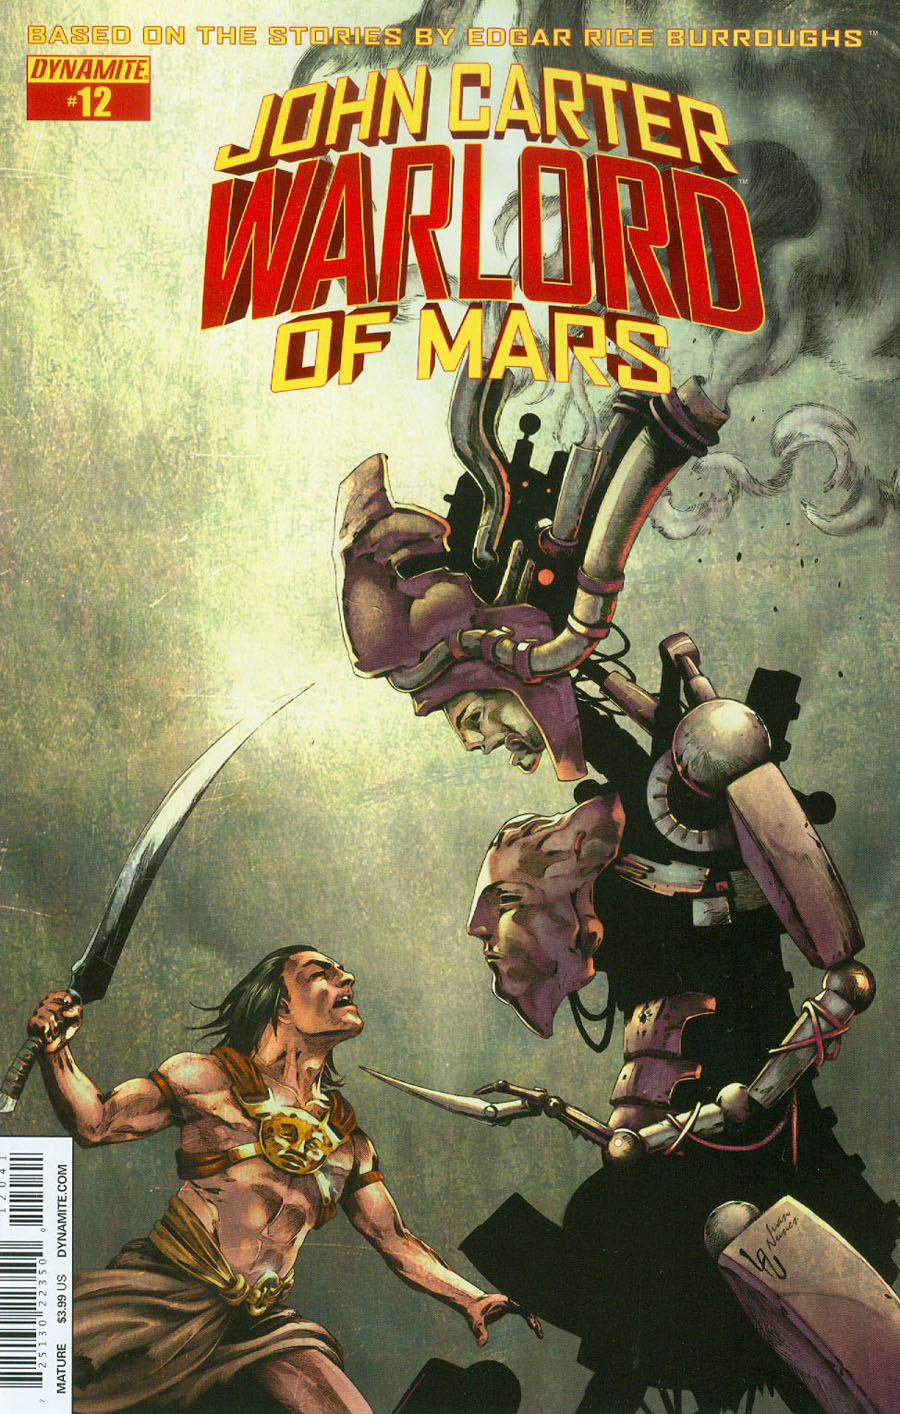 John Carter Warlord Of Mars Vol 2 #12 Cover D Variant Jonathan Lau Subscription Cover